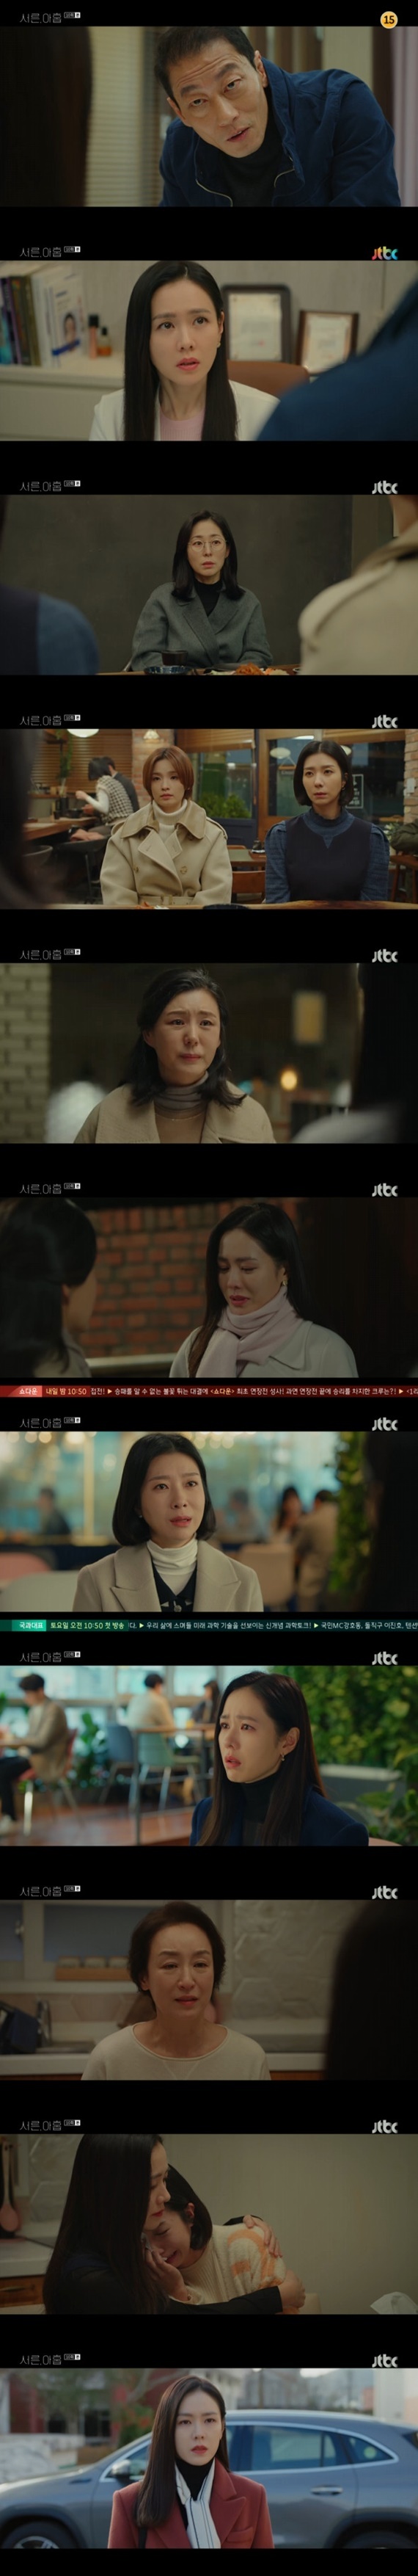 Seoul = = Thirty, nine Son Ye-jin has learned that your parents Seo Ji-young has been asking for money from their adoptive parents.JTBC Wednesday-Thursday Evening drama Thirty, Nine (playplayplay by Yoo Young-ah/director Kim Sang-ho), which was broadcast at 10:30 pm on the 24th, showed a questionable man visiting the dermatology department of Cha Mi-jo (Son Ye-jin).The strange man looked at Chamijo with an unusual eye and was embarrassed by Chamijos appearance and interest in the dermatology itself rather than the medical treatment.The men then pressed Cha Mi-jo, saying that there is something to be received by Lee Kyung-sook (Seo Ji-young), and the situation ended with the appearance of Kim Sun-woo (Yoon Woo-jin) and Cha Mi-hyun (Kang Mal-geum) who witnessed Cha Mi-jo who was afraid.Cha Mi-hyun then called Chung Chan-young (Jeonmido) and Jang Joo-hee (Kim Ji Hyun) and mentioned a strange man who came to Hospital. Ive never seen Mizo so surprised, what happened recently?So Chung Chan-young and Jang Joo-hee revealed Lee Kyung-sook, and Cha Mi-hyun learned that Cha Mi-jos Your Parents Lee Kyung-sook was in prison for seven crimes before the fraud.Chamijo confessed to Yen He (Lee Kan-hee) that he met with your parents Lee Kyung-sook.Zheng He said to Chamijo, who is sorry for saying late, I knew where you were.Chamijo then cried, talking about the man who came to Hospital.After that, Chamijo found out that Lee Kyung-sook continued to ask for money from Zheng He, and Zheng He comforted Chamijo, who was self-defeating, saying, I thought you were lucky to come to my house.Chamijo said to Zheng He, Thank you and Im sorry.Jang Joo-hee (Kim Ji Hyun) expressed his sadness that he had accumulated by telling Cha Mi-jo about his mother Night Modifier (South Miami), who is struggling because of Lee Kyung-sook.Jang Joo-hee said, I can be hard together, I have to go back to the back, I have to be hard, I am so scared that you and I will still be together without Chan Young.Cha Mi-jo visited Night modifier and thanked him for understanding the time when Night modifier would have been difficult alone.Jang Joo-hee thanked Cha Mi-jo for relieving Night modifiers guilt, and then Cha Mi-jos search for Lee Kyung-sooks prison again caught the eye.On the other hand, JTBC Wednesday-Thursday Evening drama Thirty, Nine is a real human romance drama that deals with the friendship, love and in-depth story of three friends who are about forty, and is broadcast every Wednesday at 10:30 pm and Thursday at 10:30 pm.